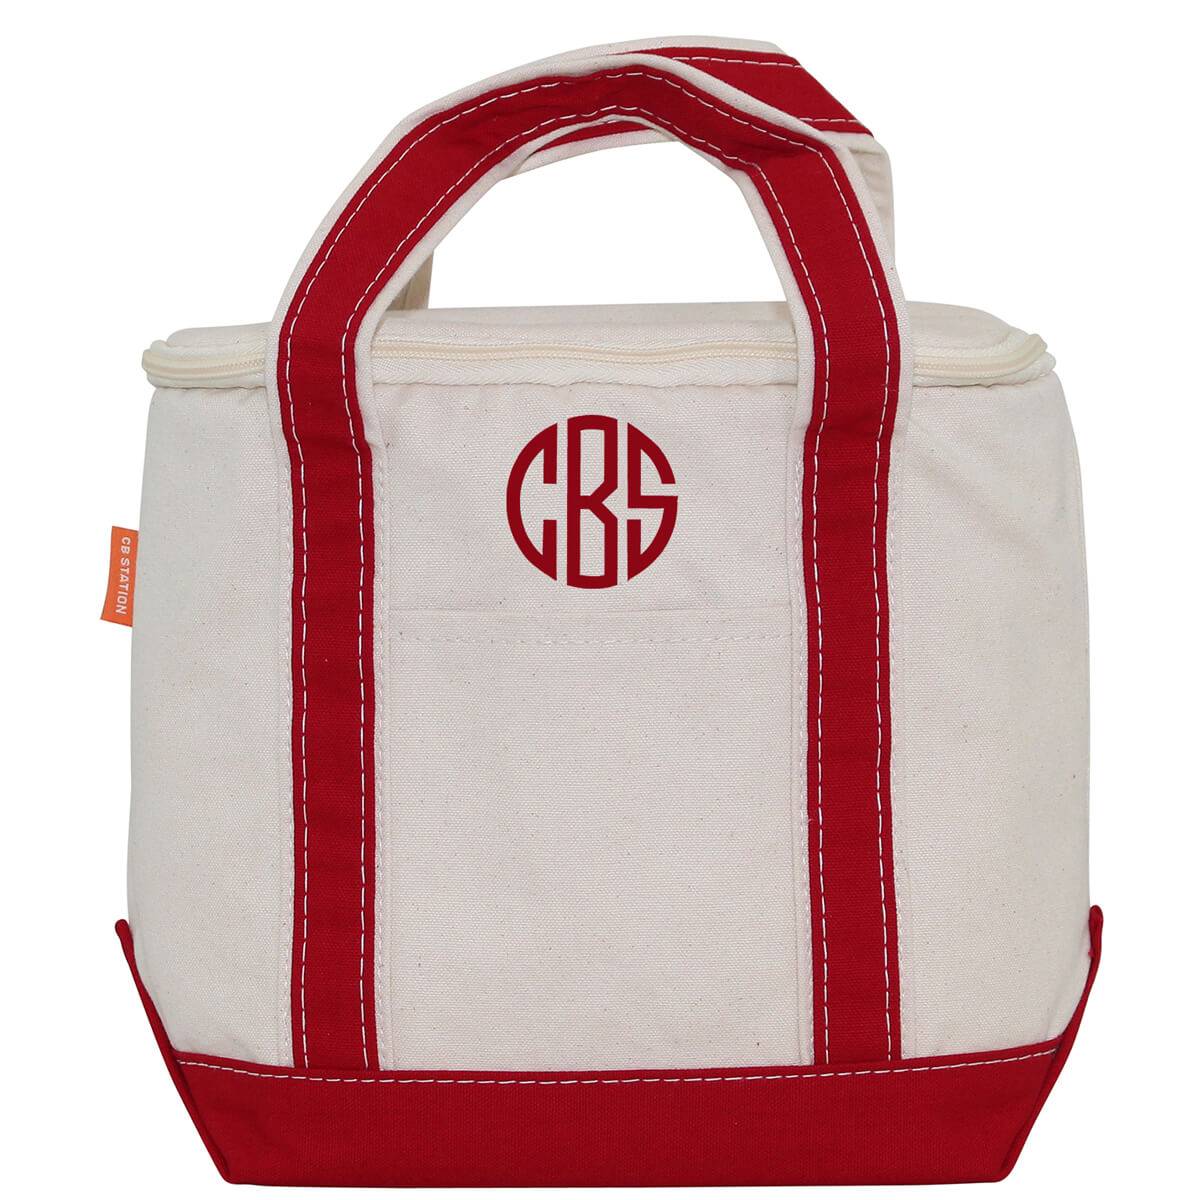 Canvas Tote Cooler - Small